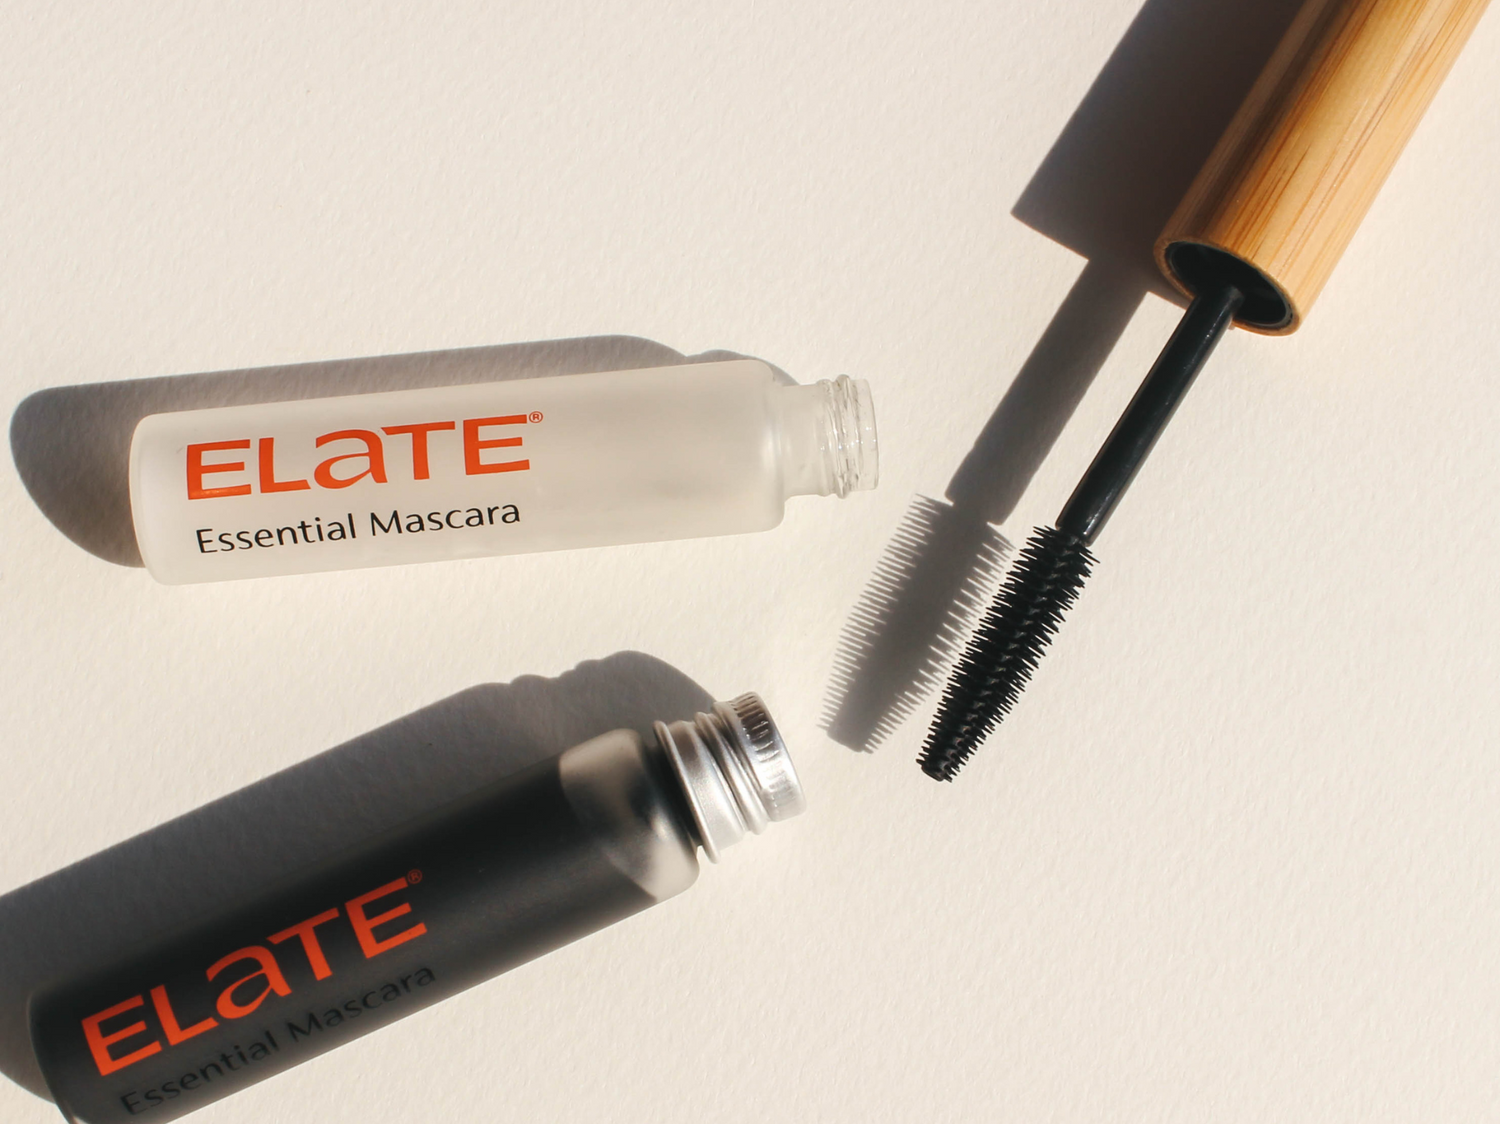 Essential Mascara: How to refill your #1 essential